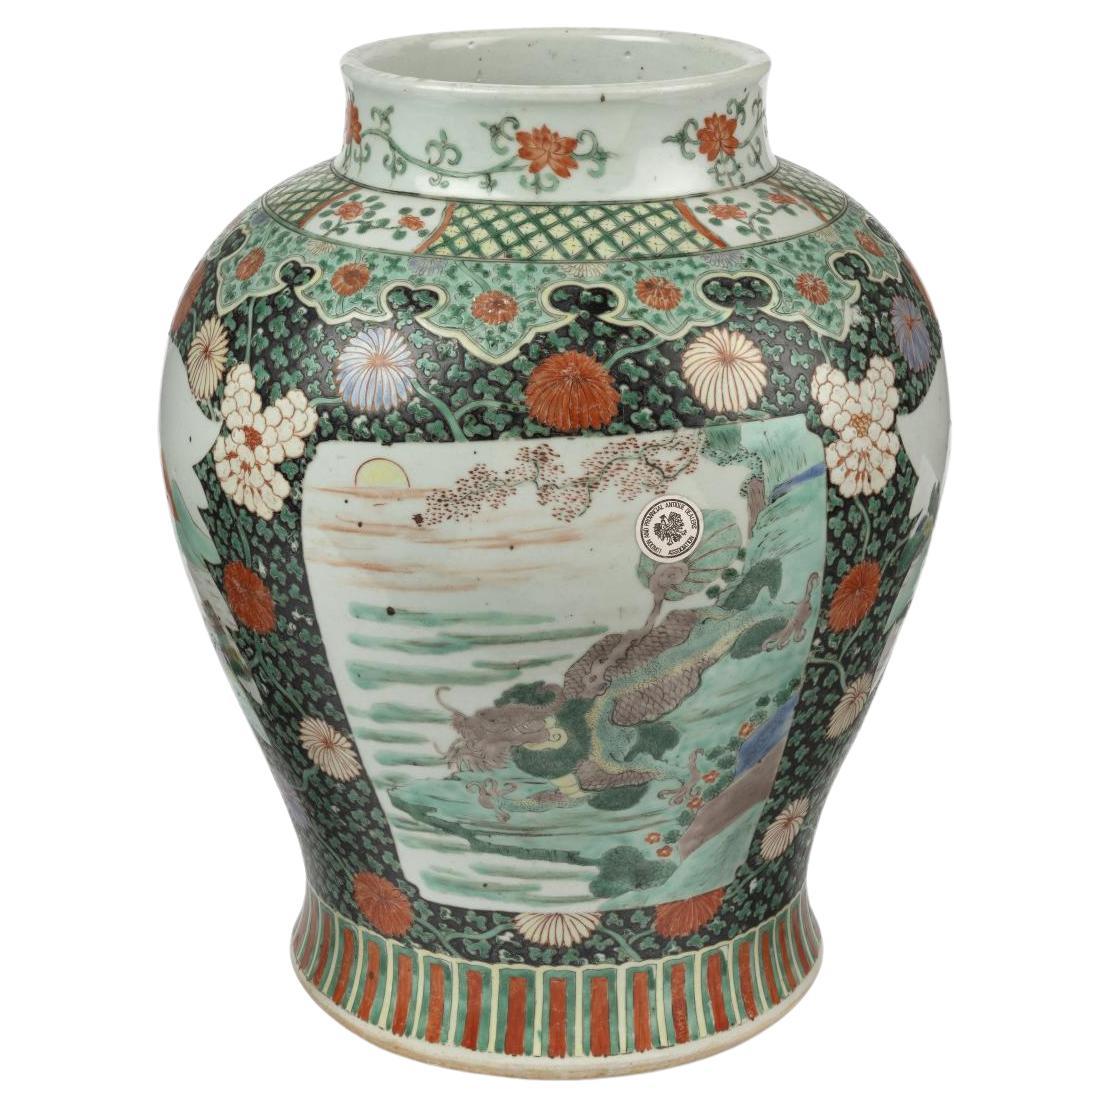 A Chinese Famille Verte Baluster Jar, 19th century